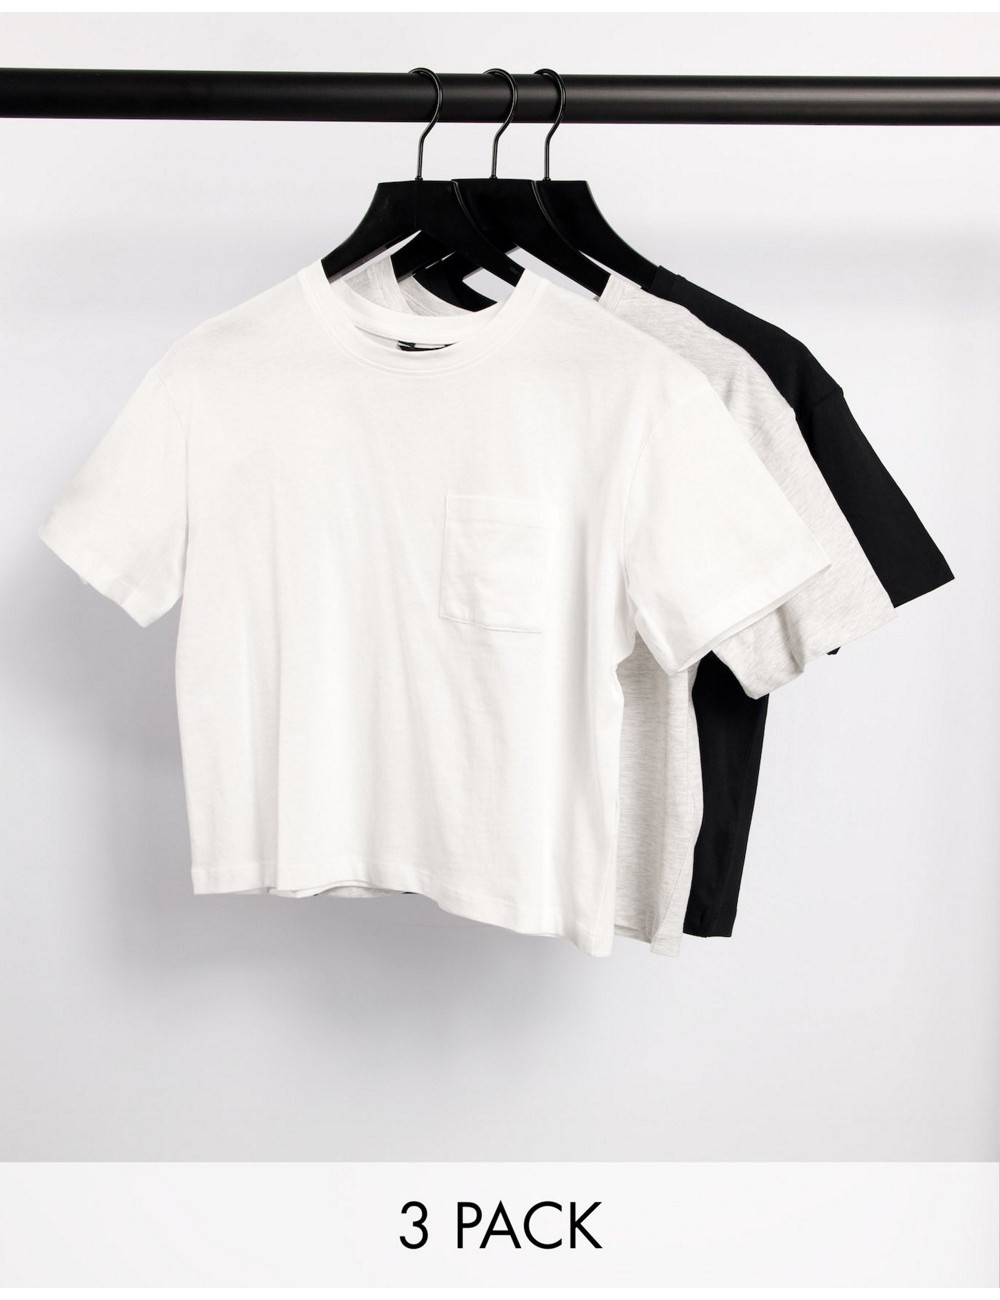 New Look 3 pack boxy t-shirts